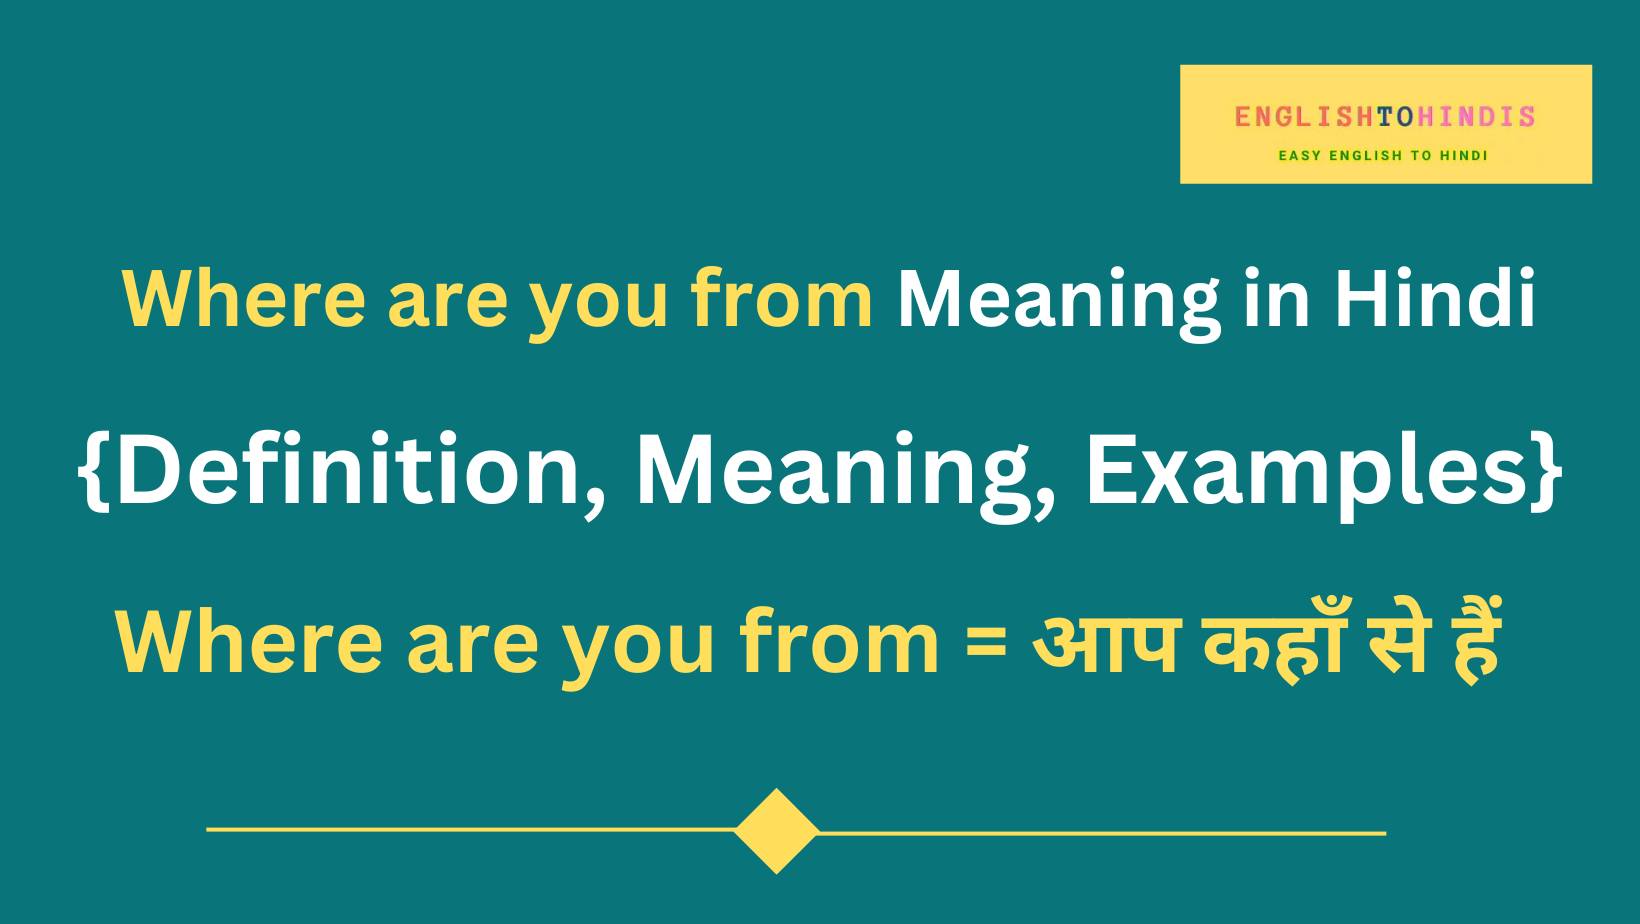 Where are you from Meaning in Hindi